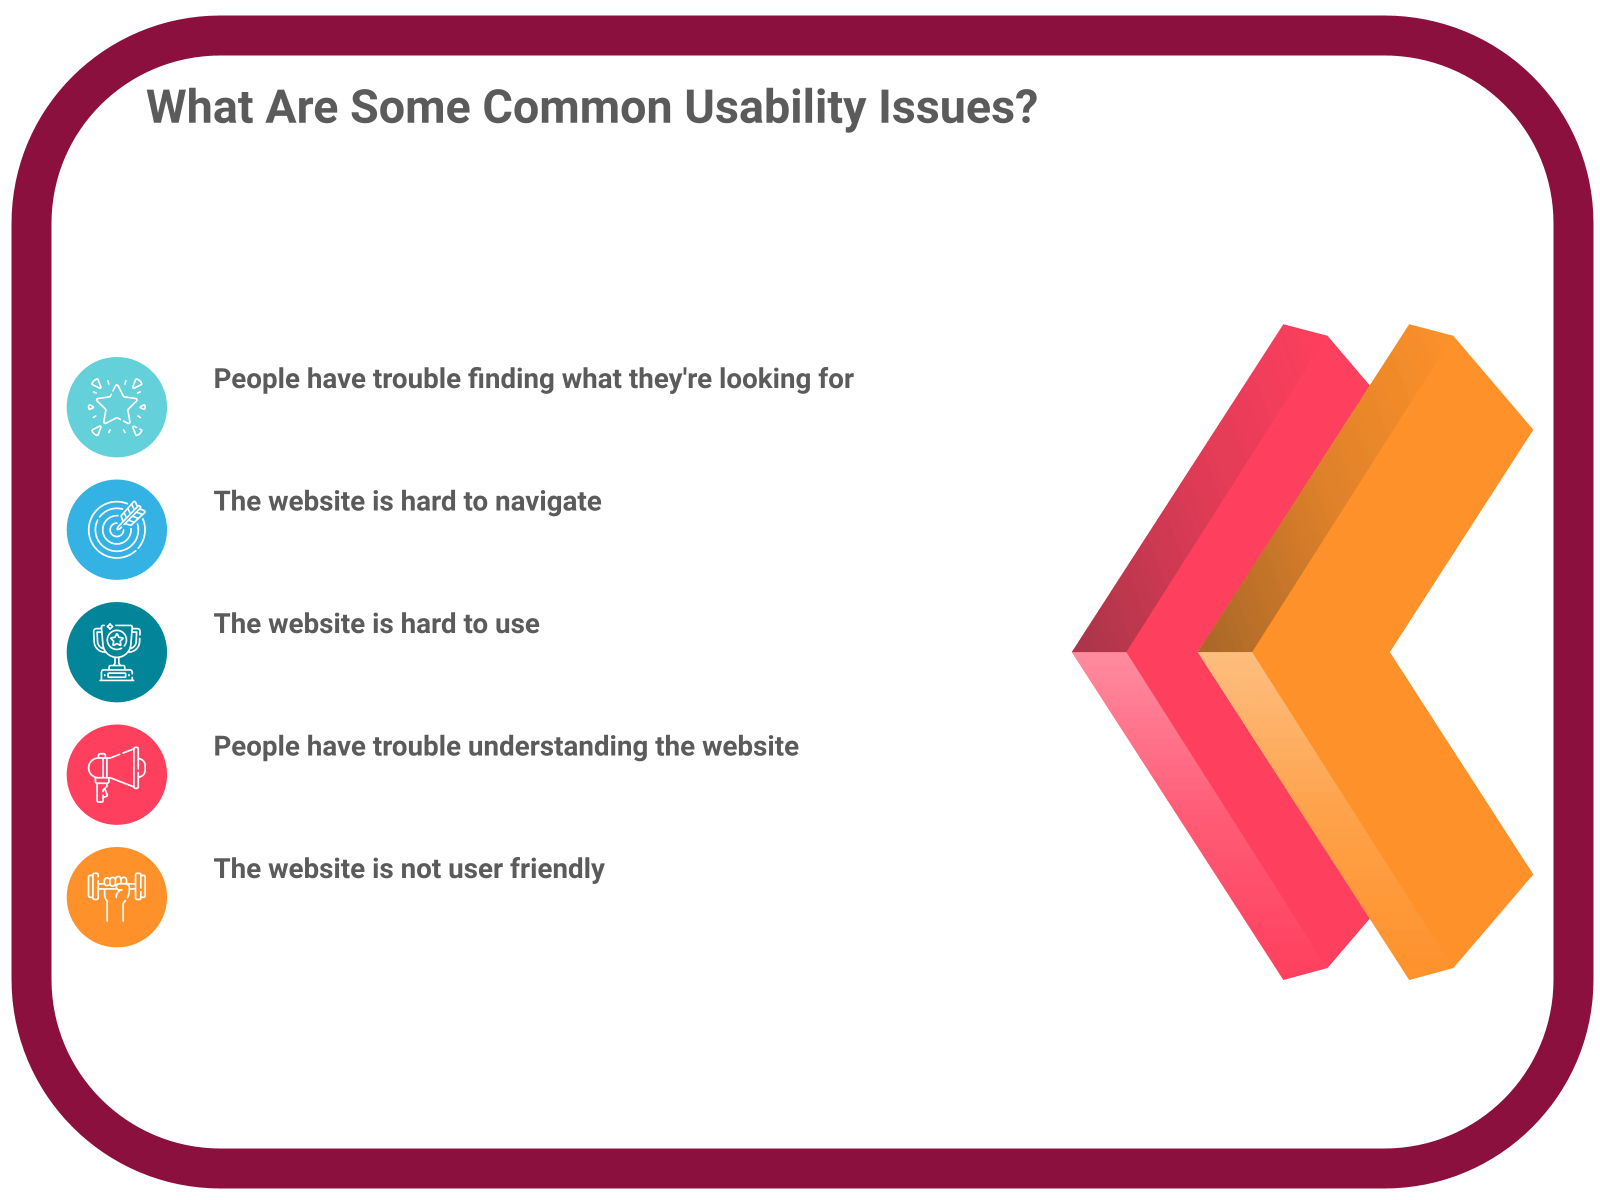 INFOGRAPHIC: What are some common usability issues? - Poll the People